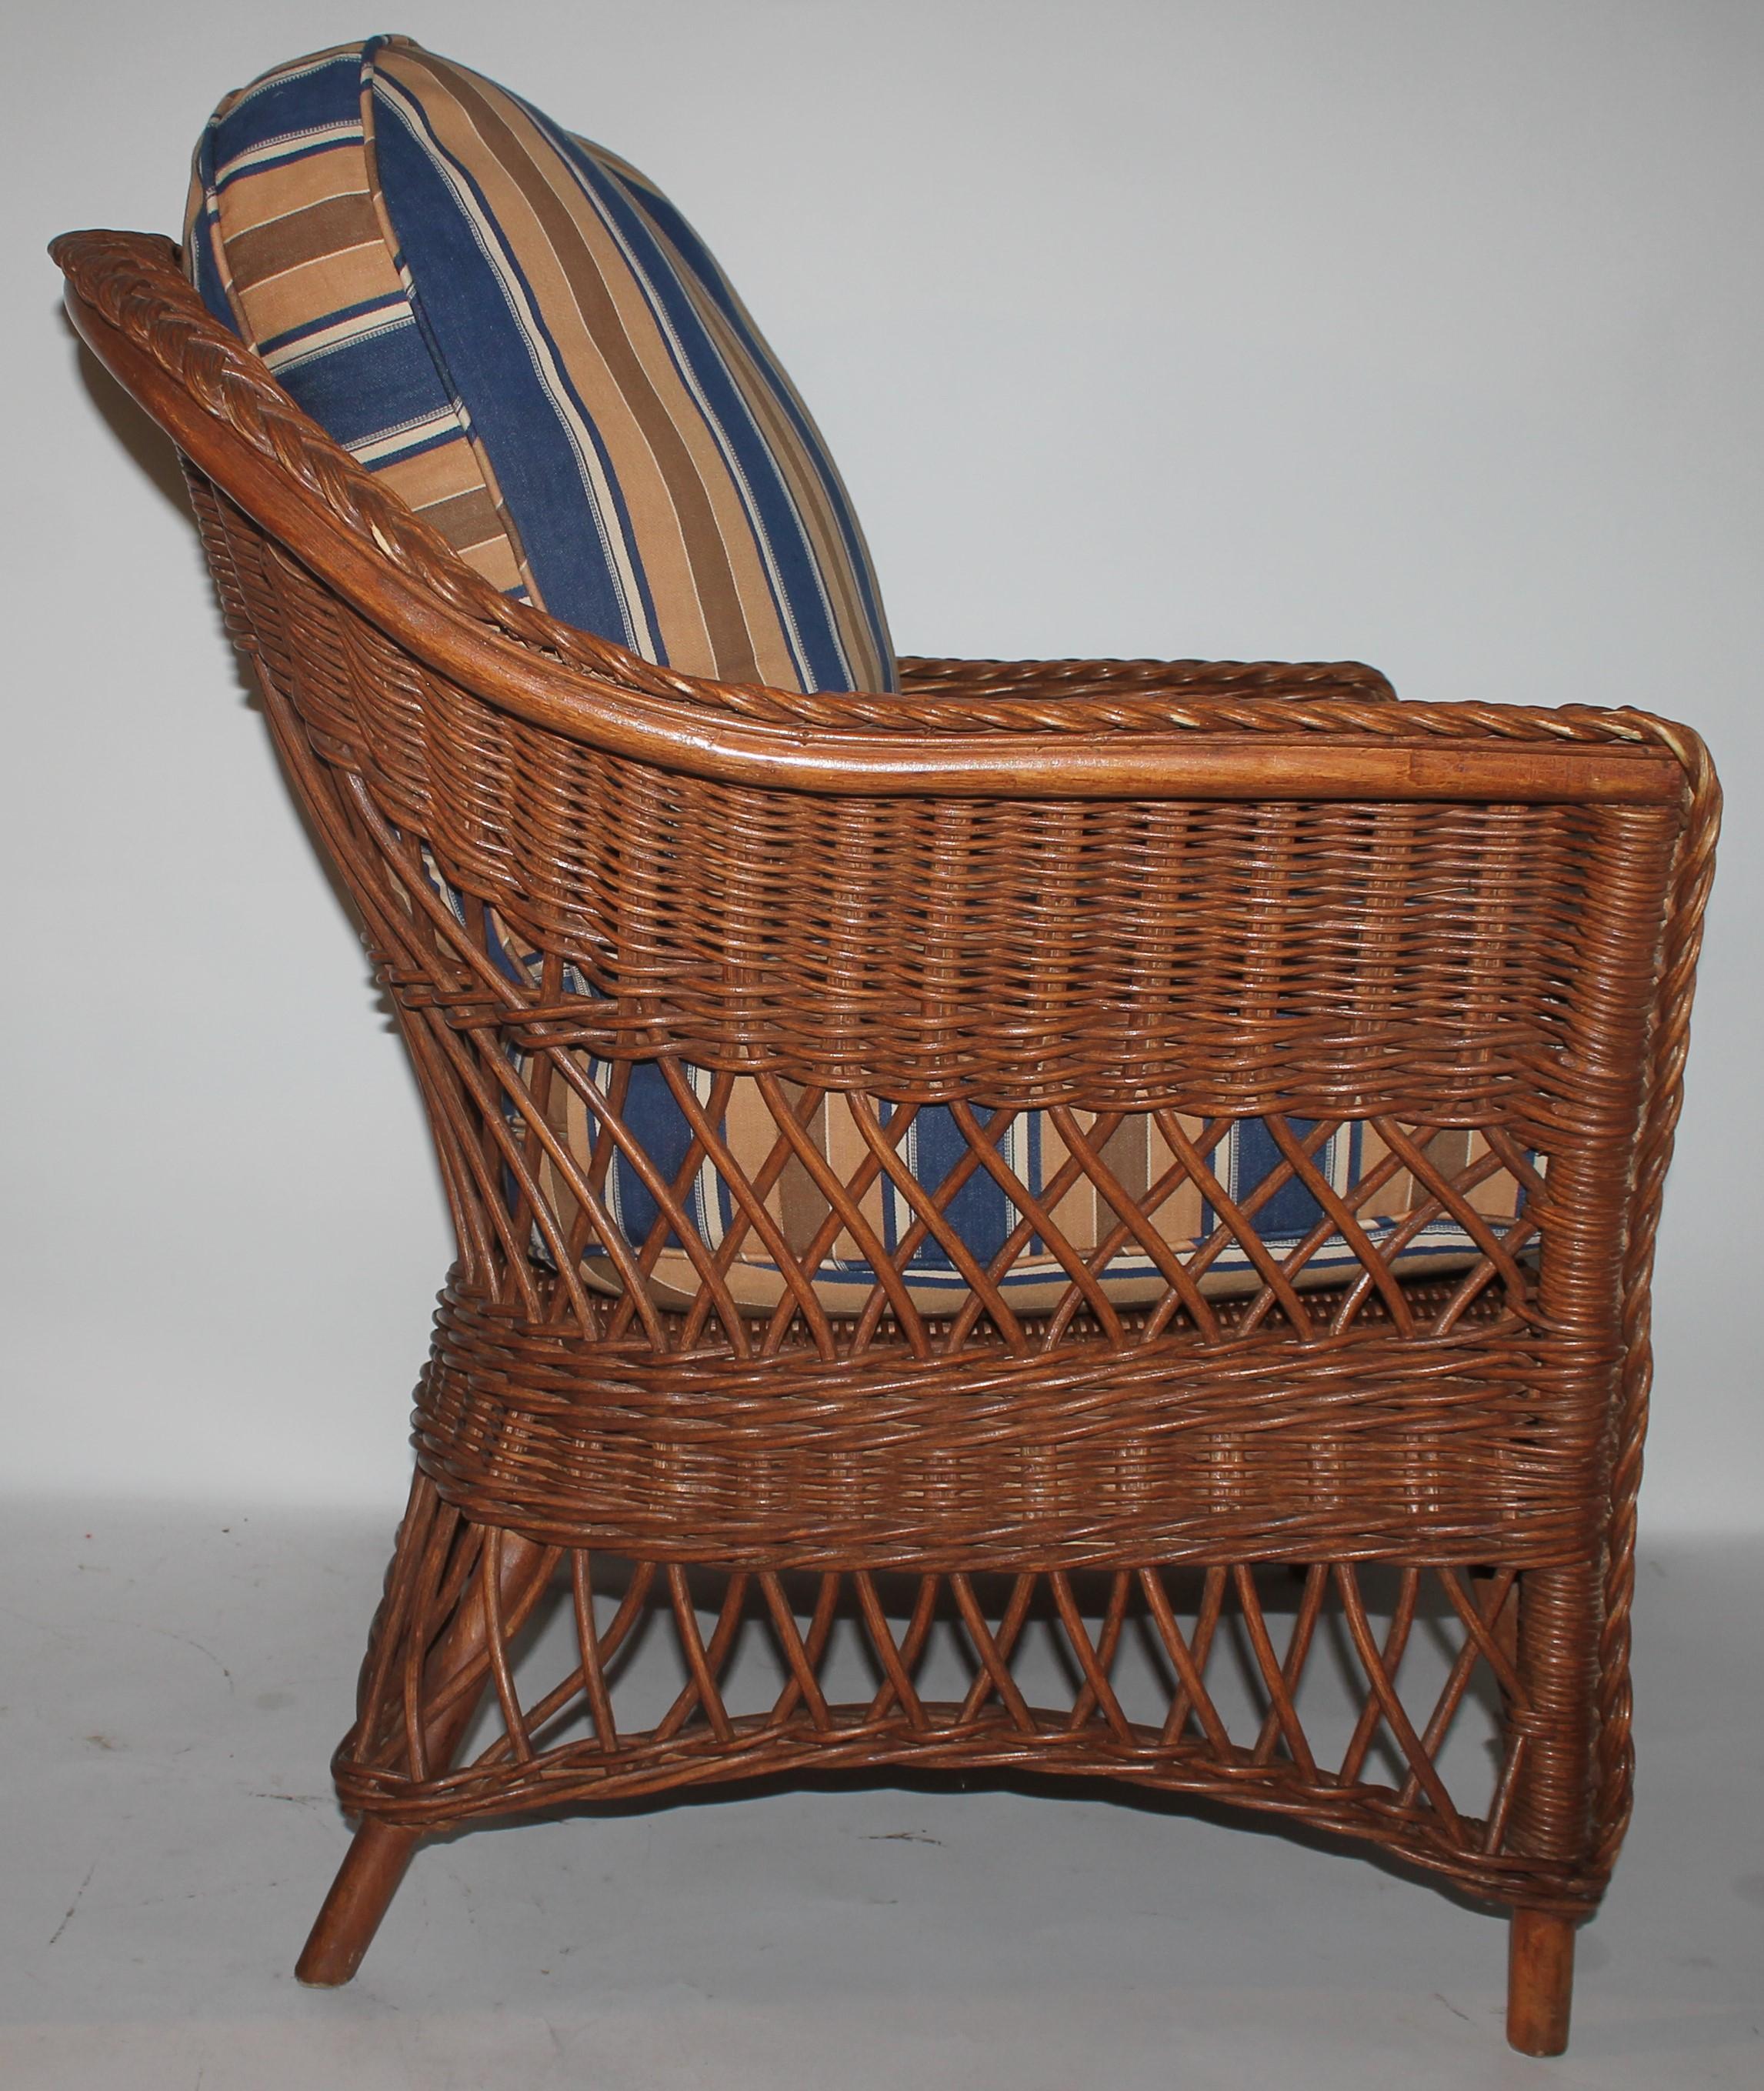 Early 20th century Haywood Wakefield wicker side chair with custom made vintage ticking cushions. The inserts are down and feather fill and can be removed for cleaning.